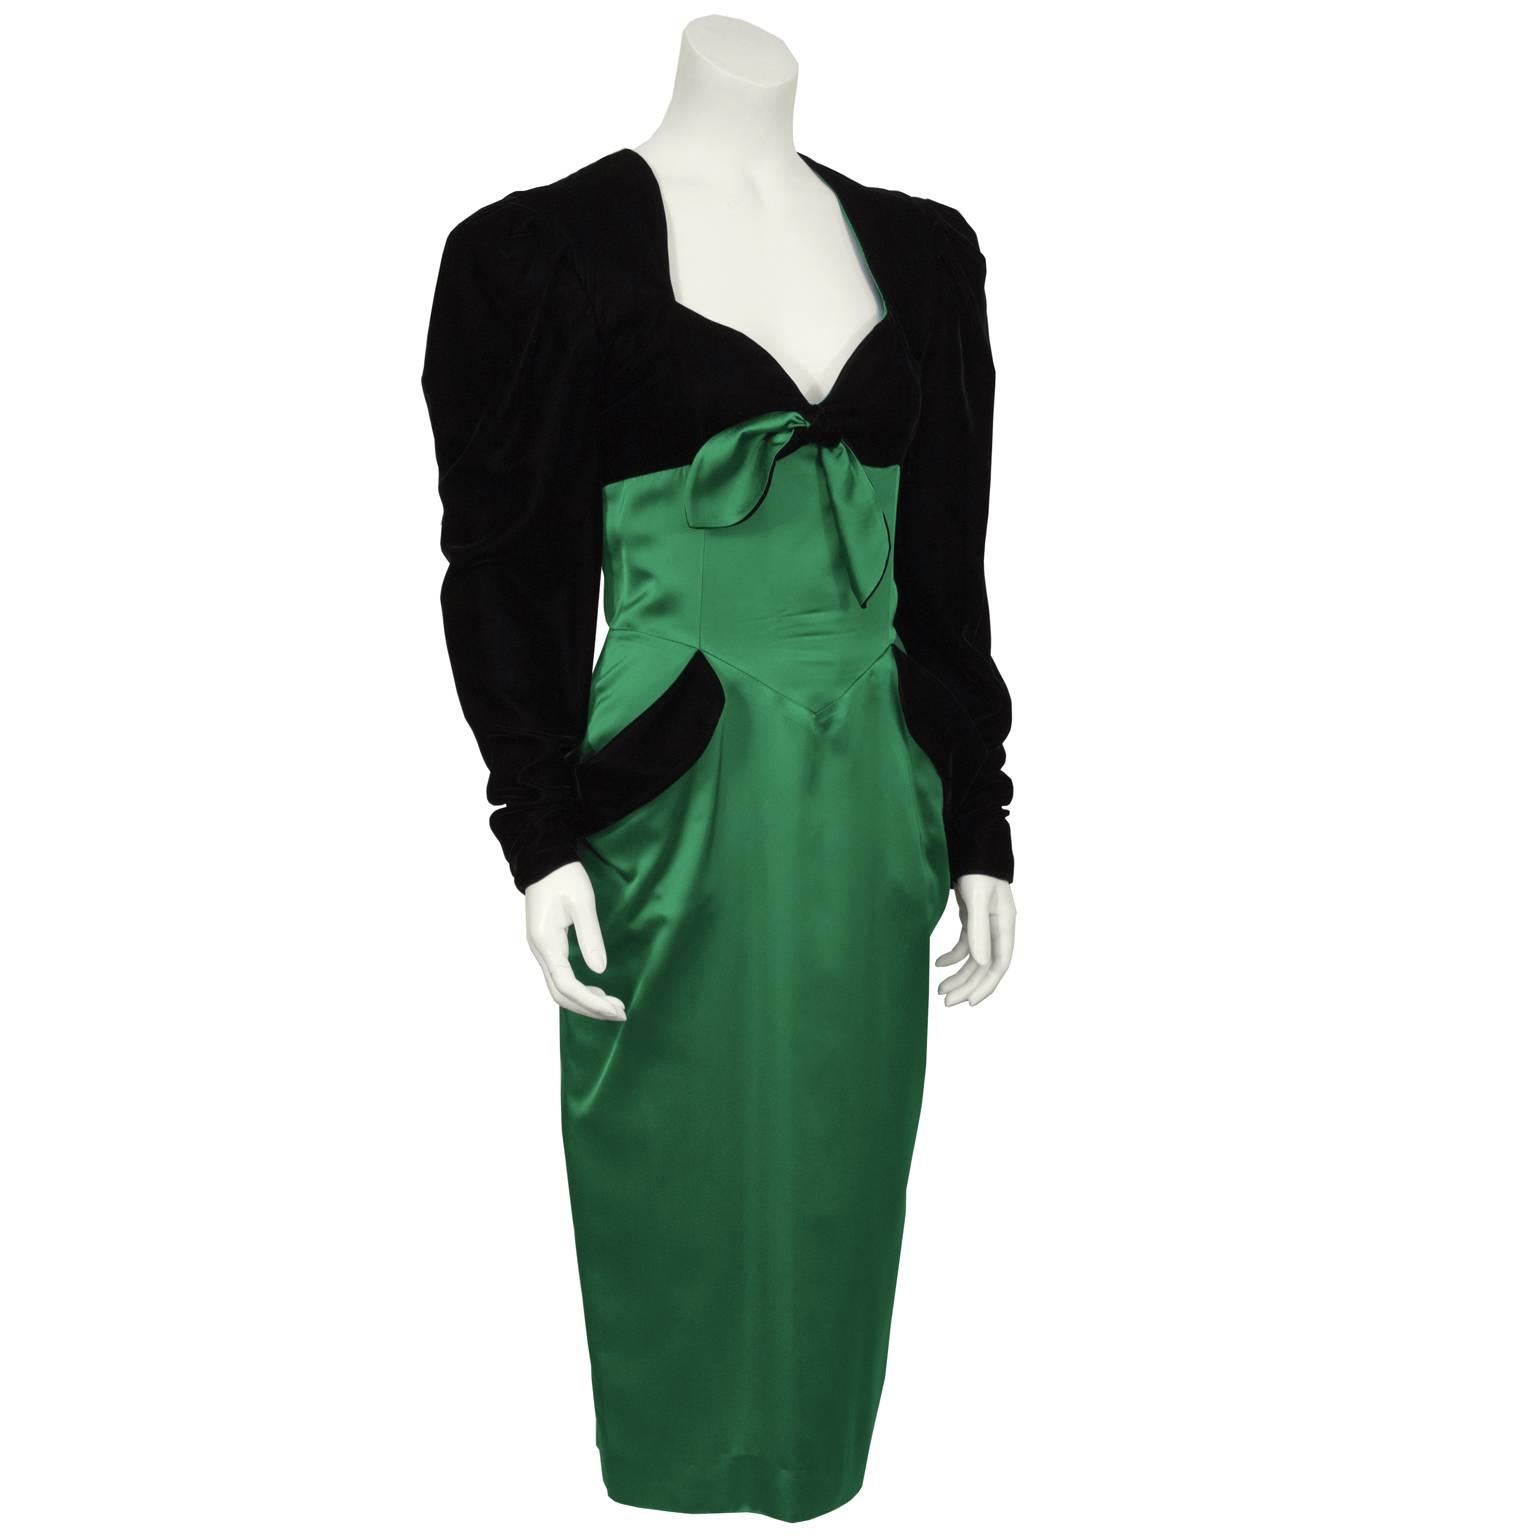 1980's black velvet and emerald satin cocktail dress by the French designer Isabelle Allard. The dress has a sweetheart neckline, fitted bodice and pencil style skirt. The sleeves and bust are made of a black velvet while the rest of the dress is a